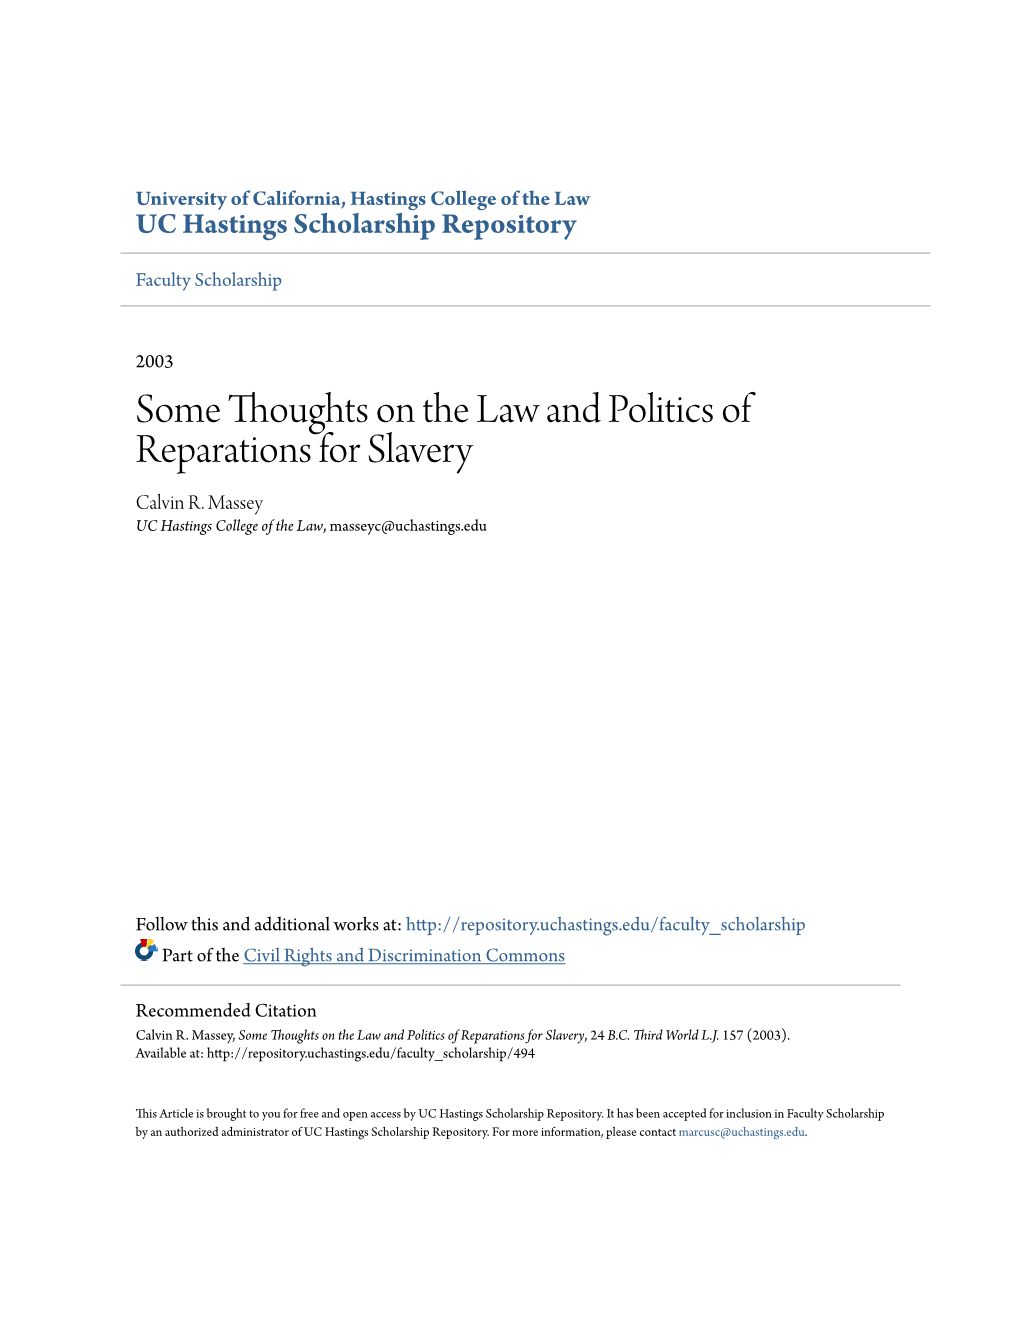 Some Thoughts on the Law and Politics of Reparations for Slavery Calvin R